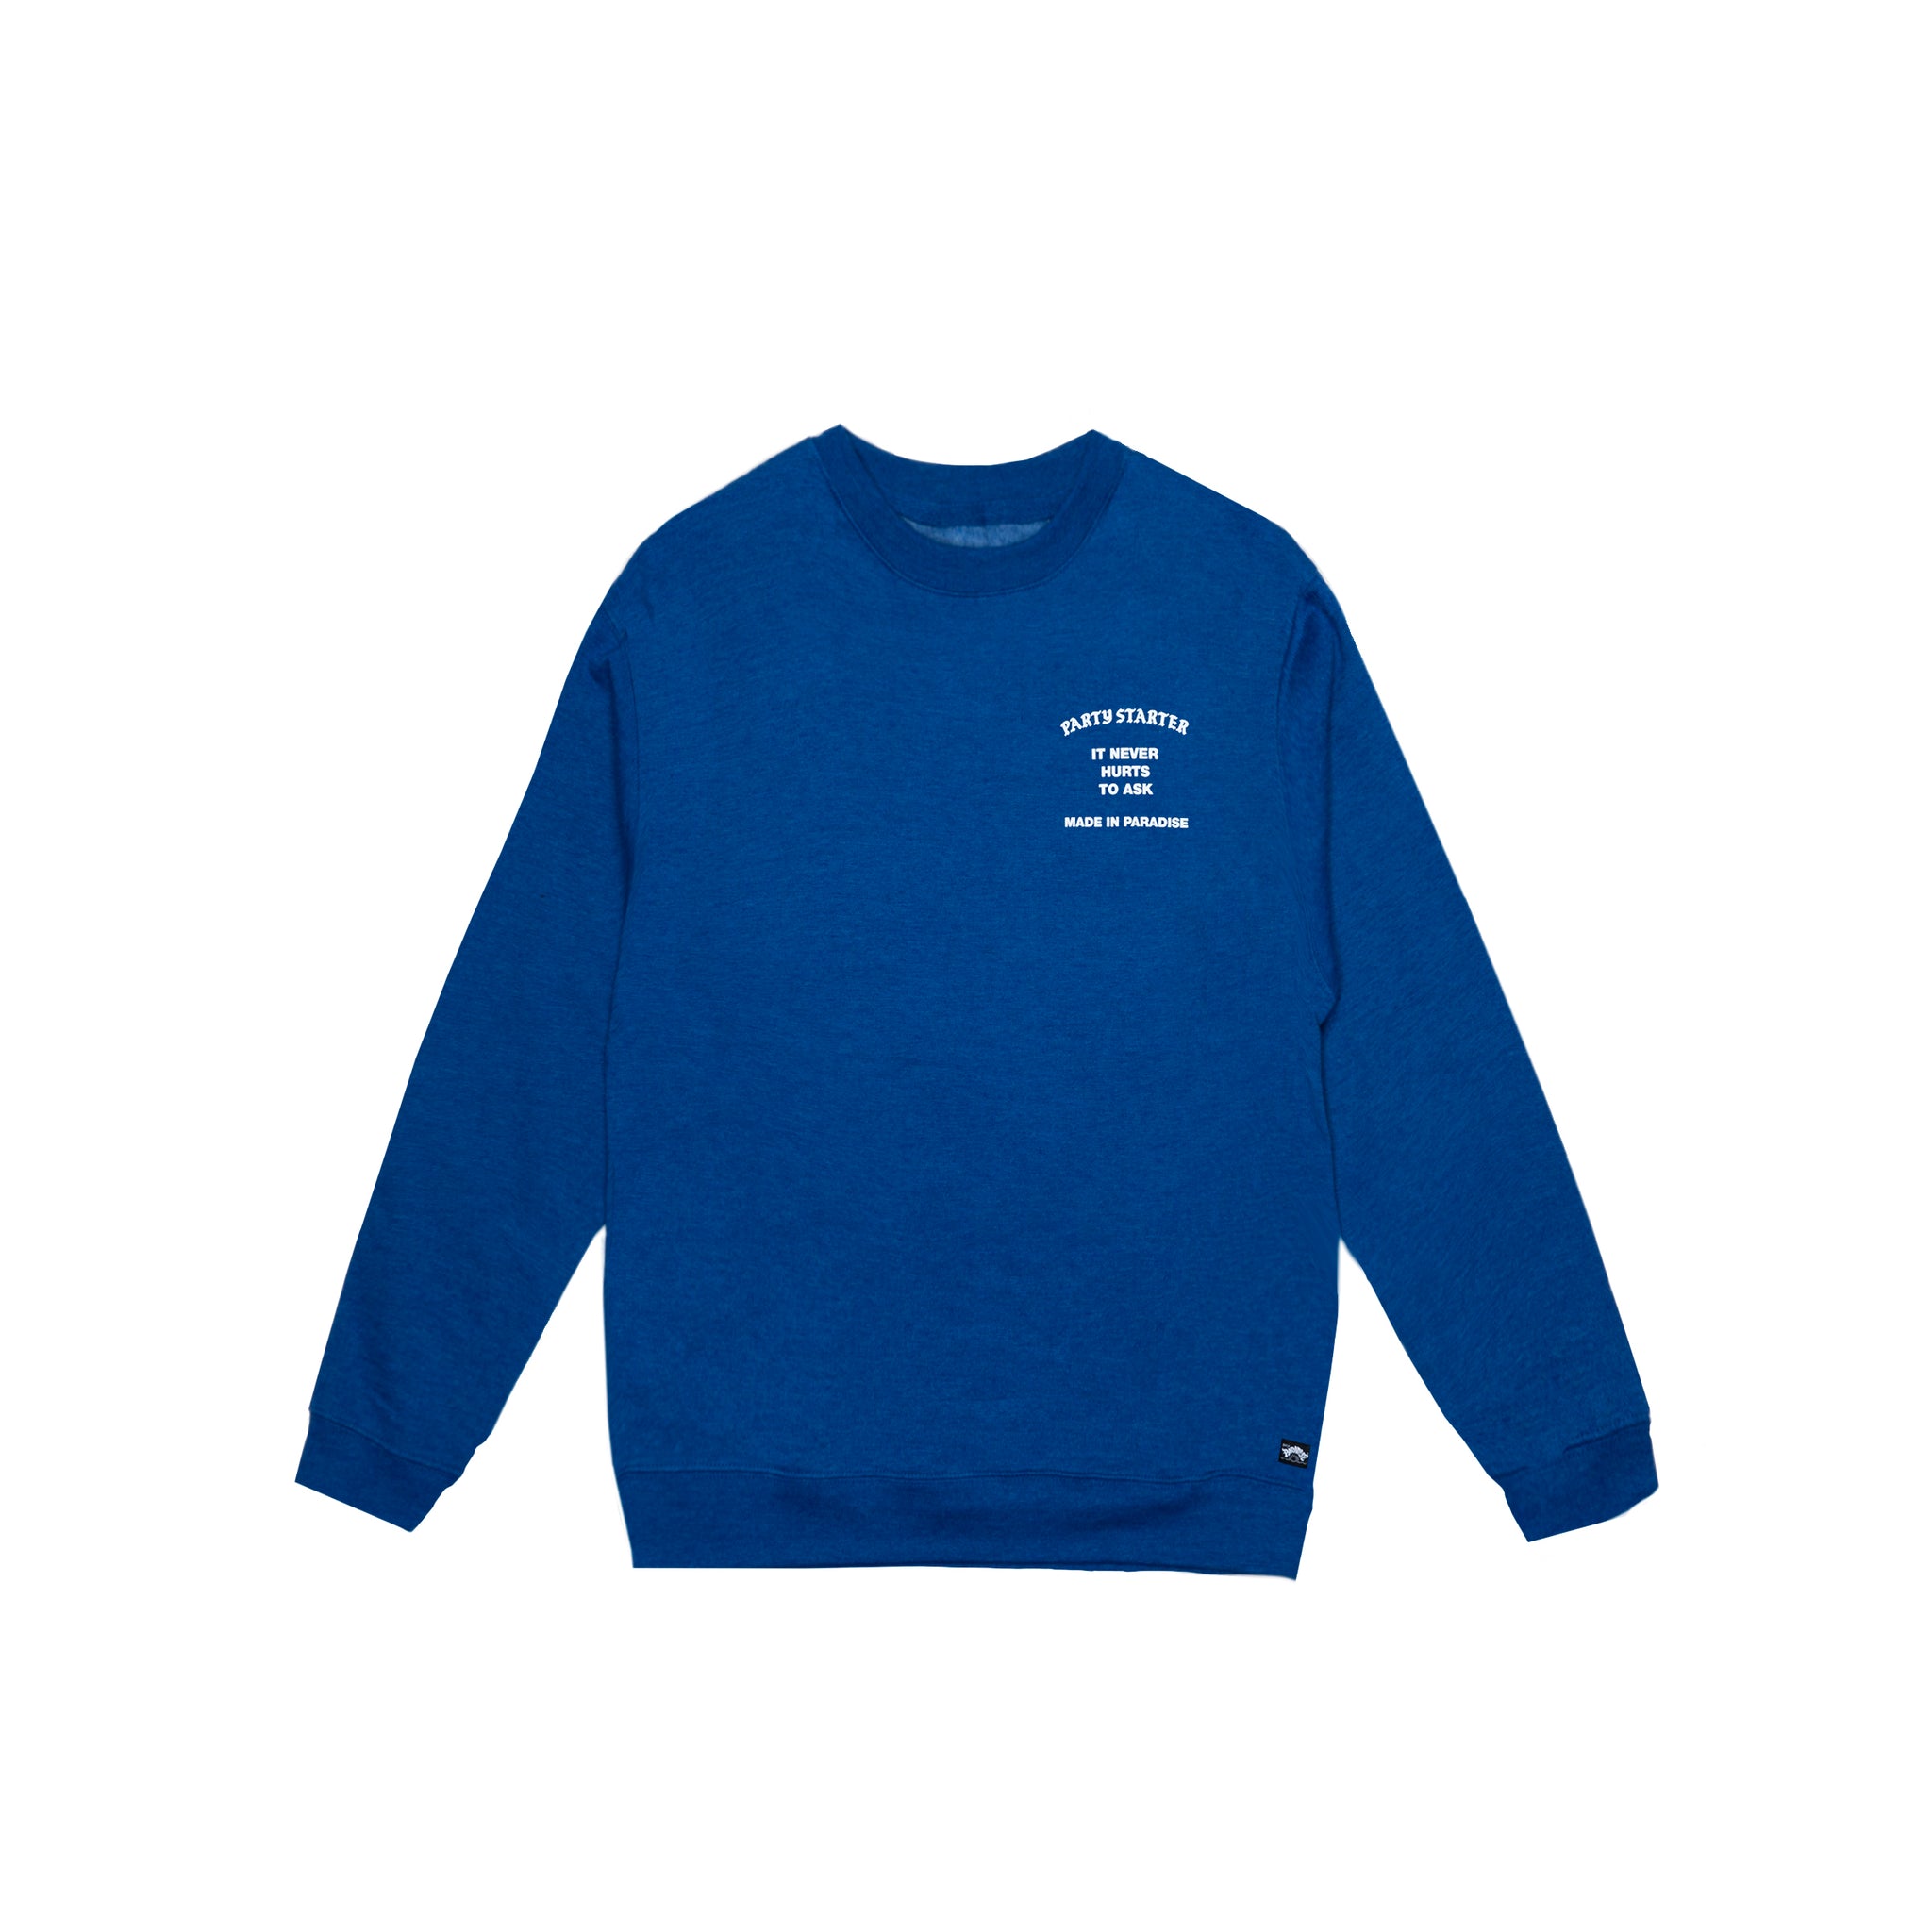 Front view of Made in Paradise World Drug Trade Collection "PARTY STARTER" blue crewneck